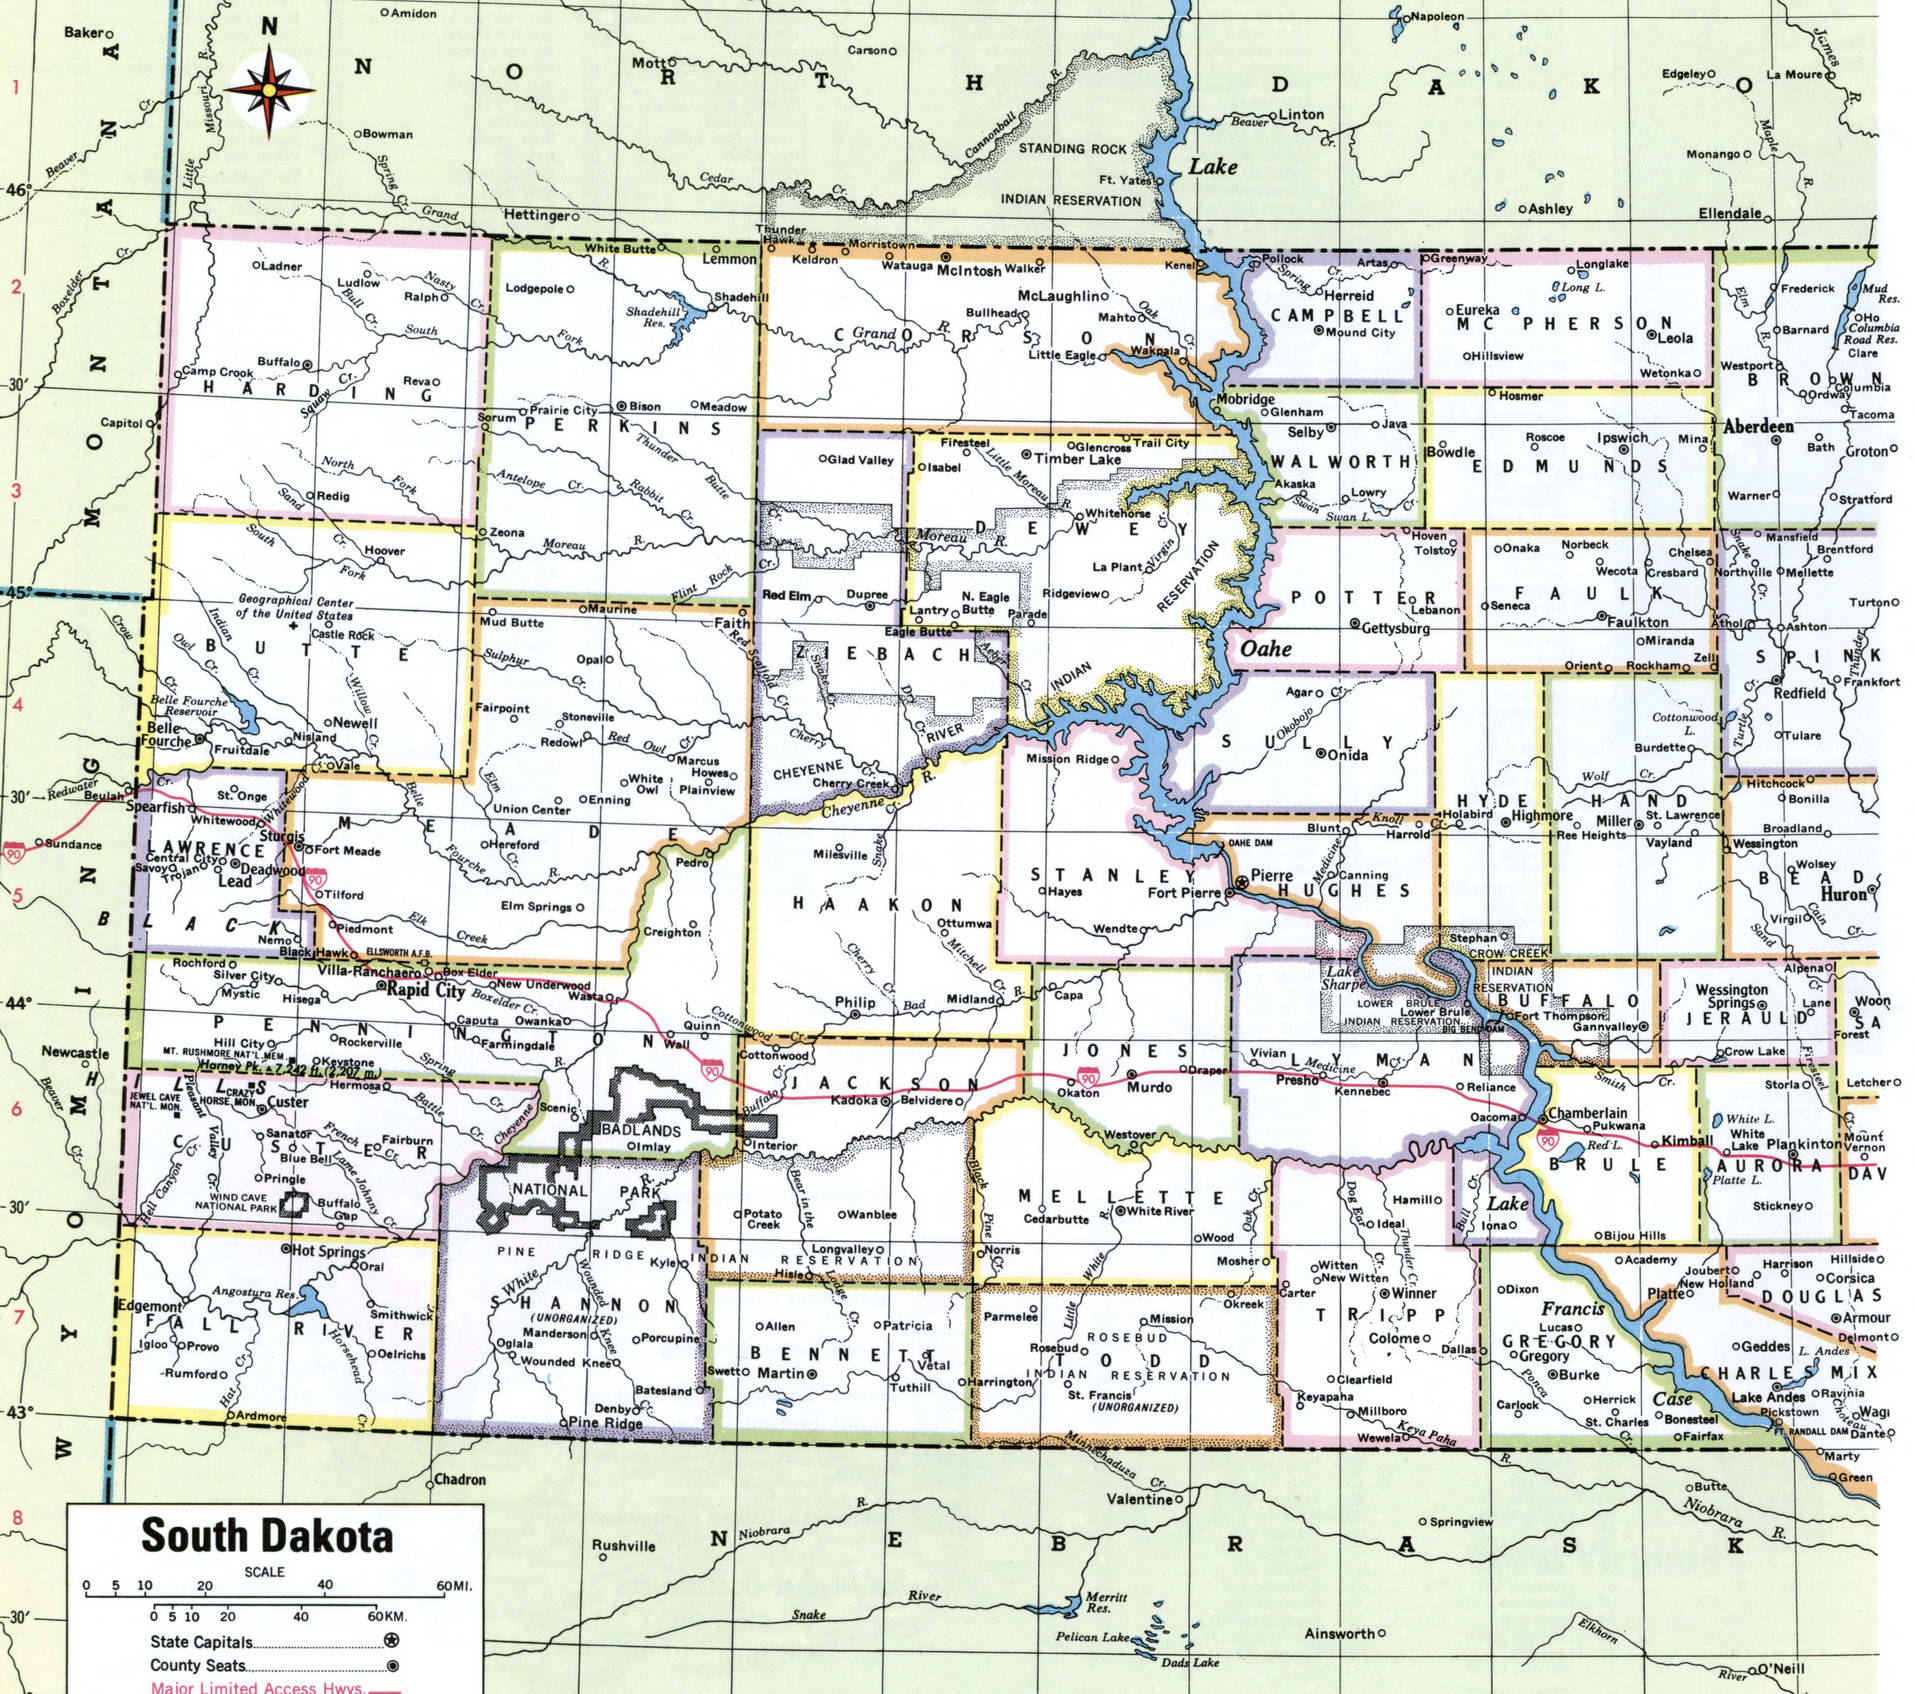 South Dakota map with counties